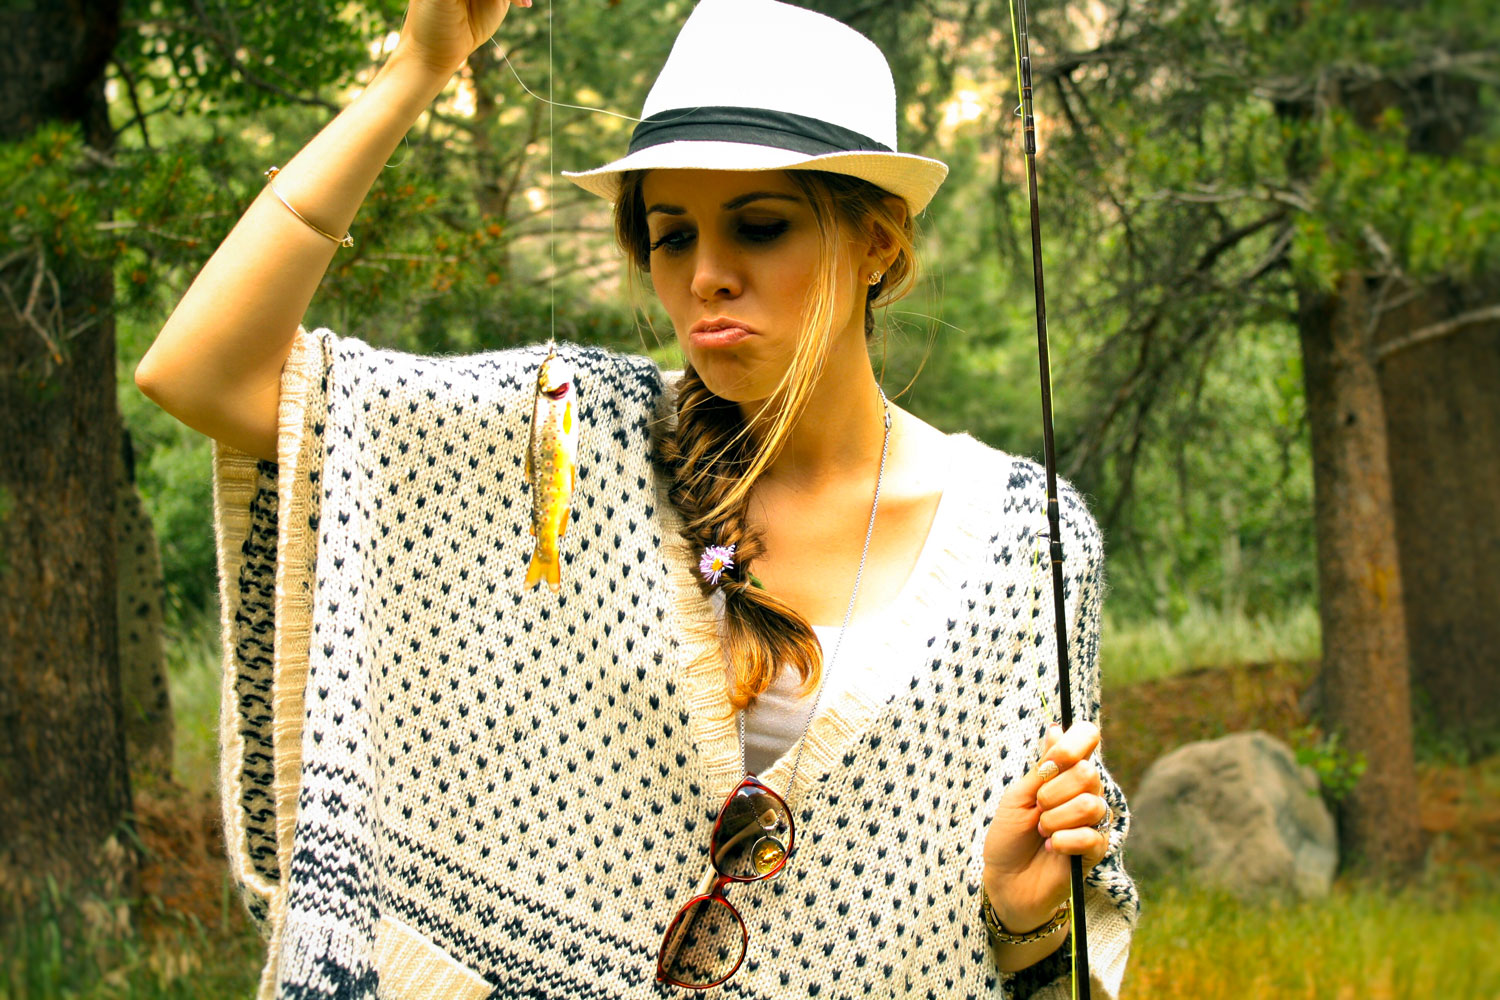 Poncho and Jeans, fishing, fishtail braid